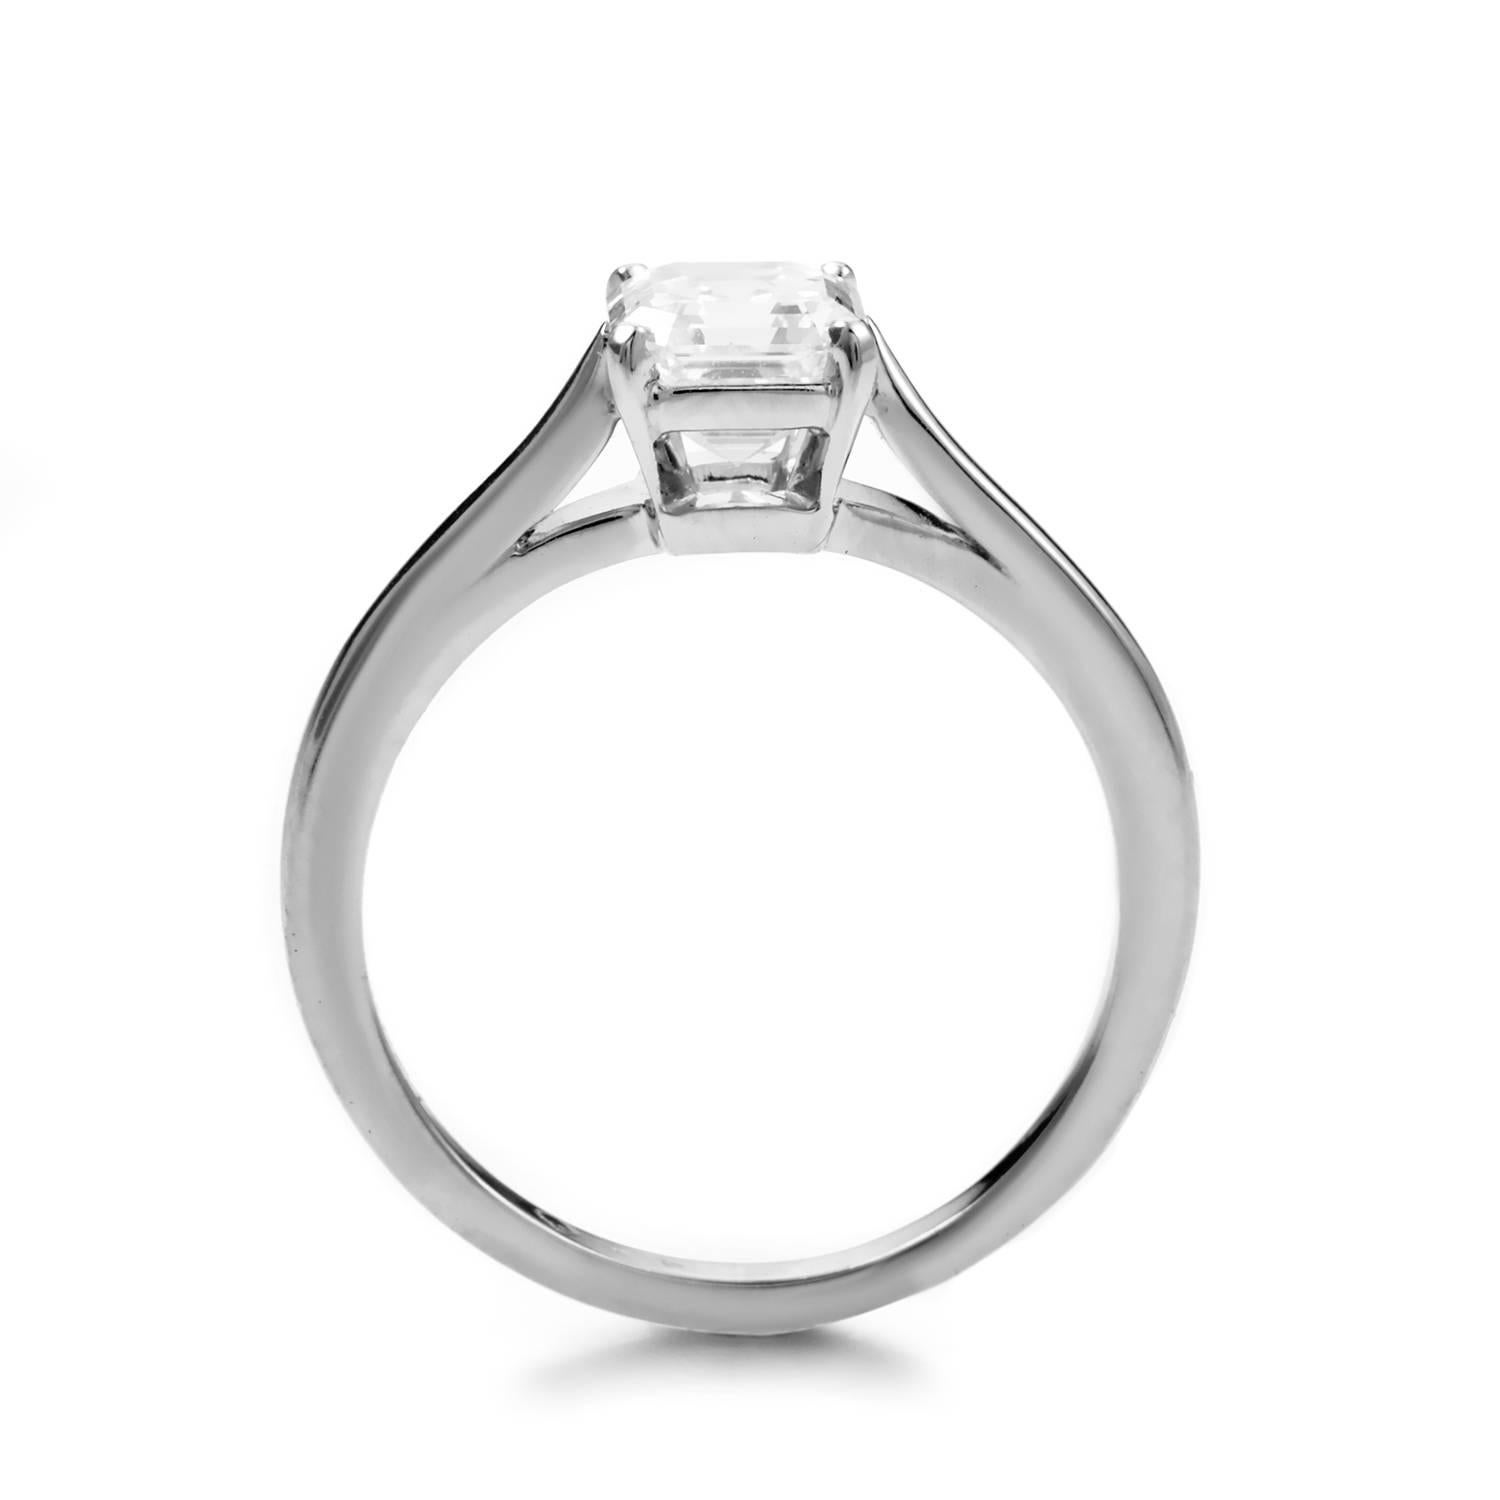 An epitome of graceful elegance and subtle luxury, this marvelous design from Van Cleef & Arpels is made of prestigious platinum and boasts a fascinating 1.04ct diamond stone, offering charming, delicate appearance of a well-designed engagement